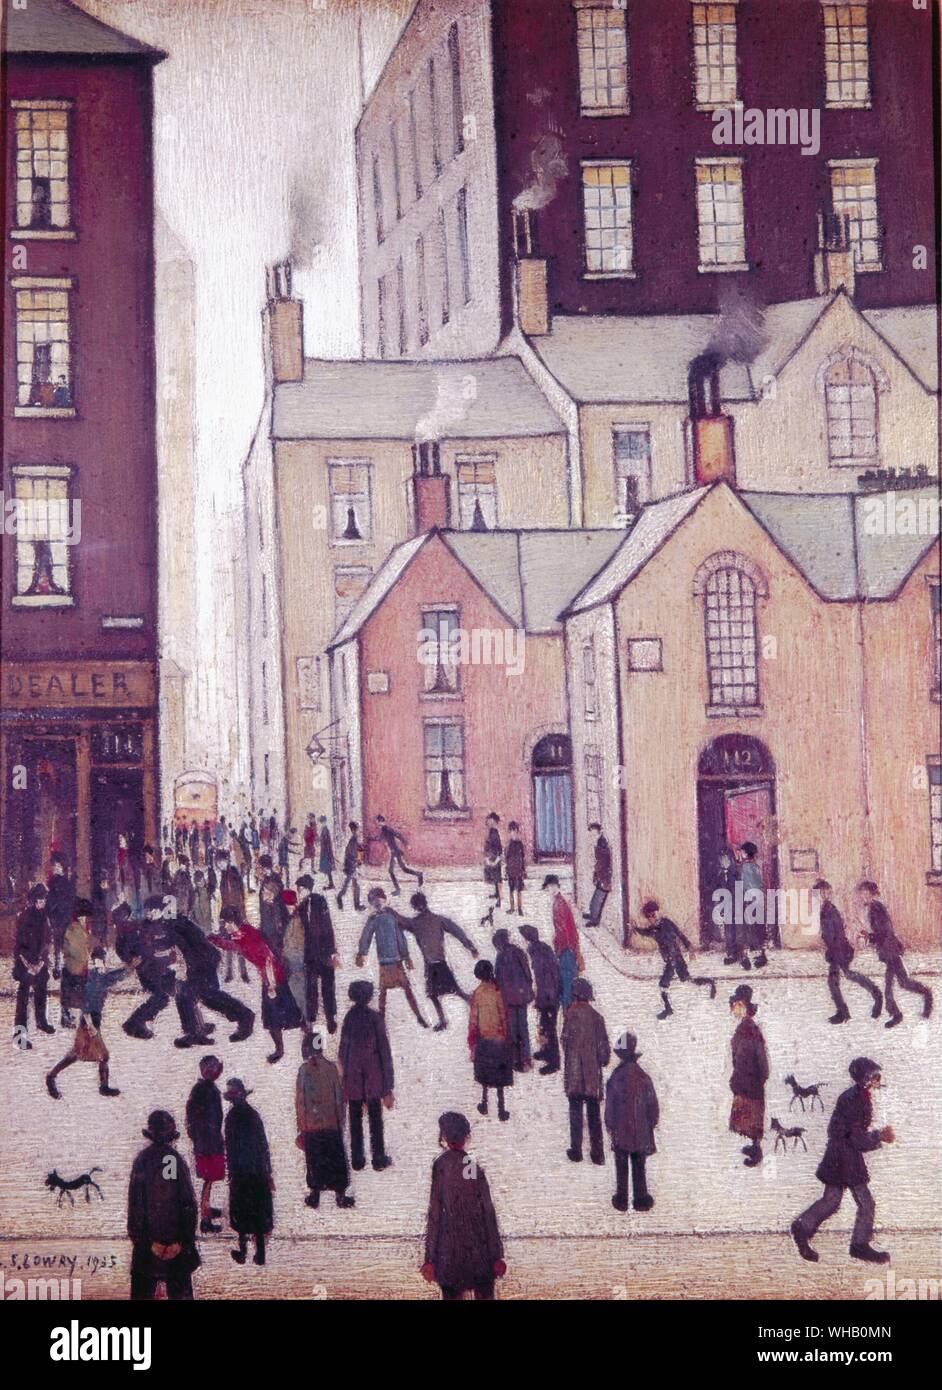 Street Scene - 1935. by L S Lowry. Lawrence Stephen Lowry (November 1, 1887 - February 23, 1976) was an English artist born in Barratt Street, Old Trafford, Manchester. Most of his pictures depict Salford, where he lived and worked for over thirty years.. Lowry is famous for painting scenes of life in the industrial districts of northern England during the early 20th century. He had a distinctive style of painting and is best known for urban landscapes peopled with many human figures.. Stock Photo